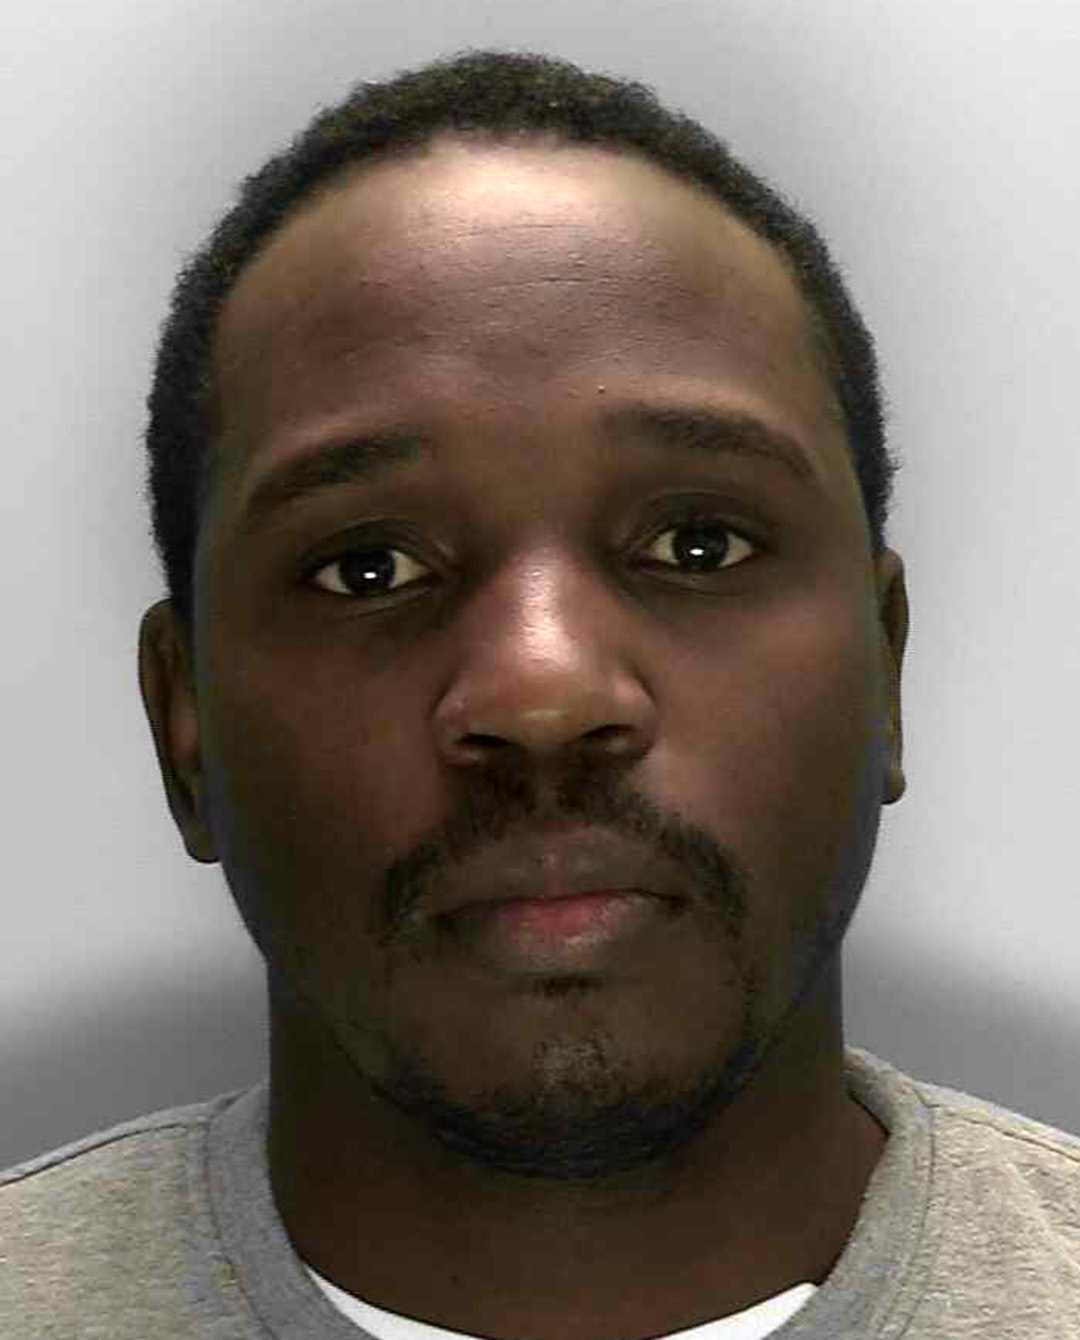 Kewbe Tomlinson has been jailed after being found to have a large amount of drugs in his car in Crawley